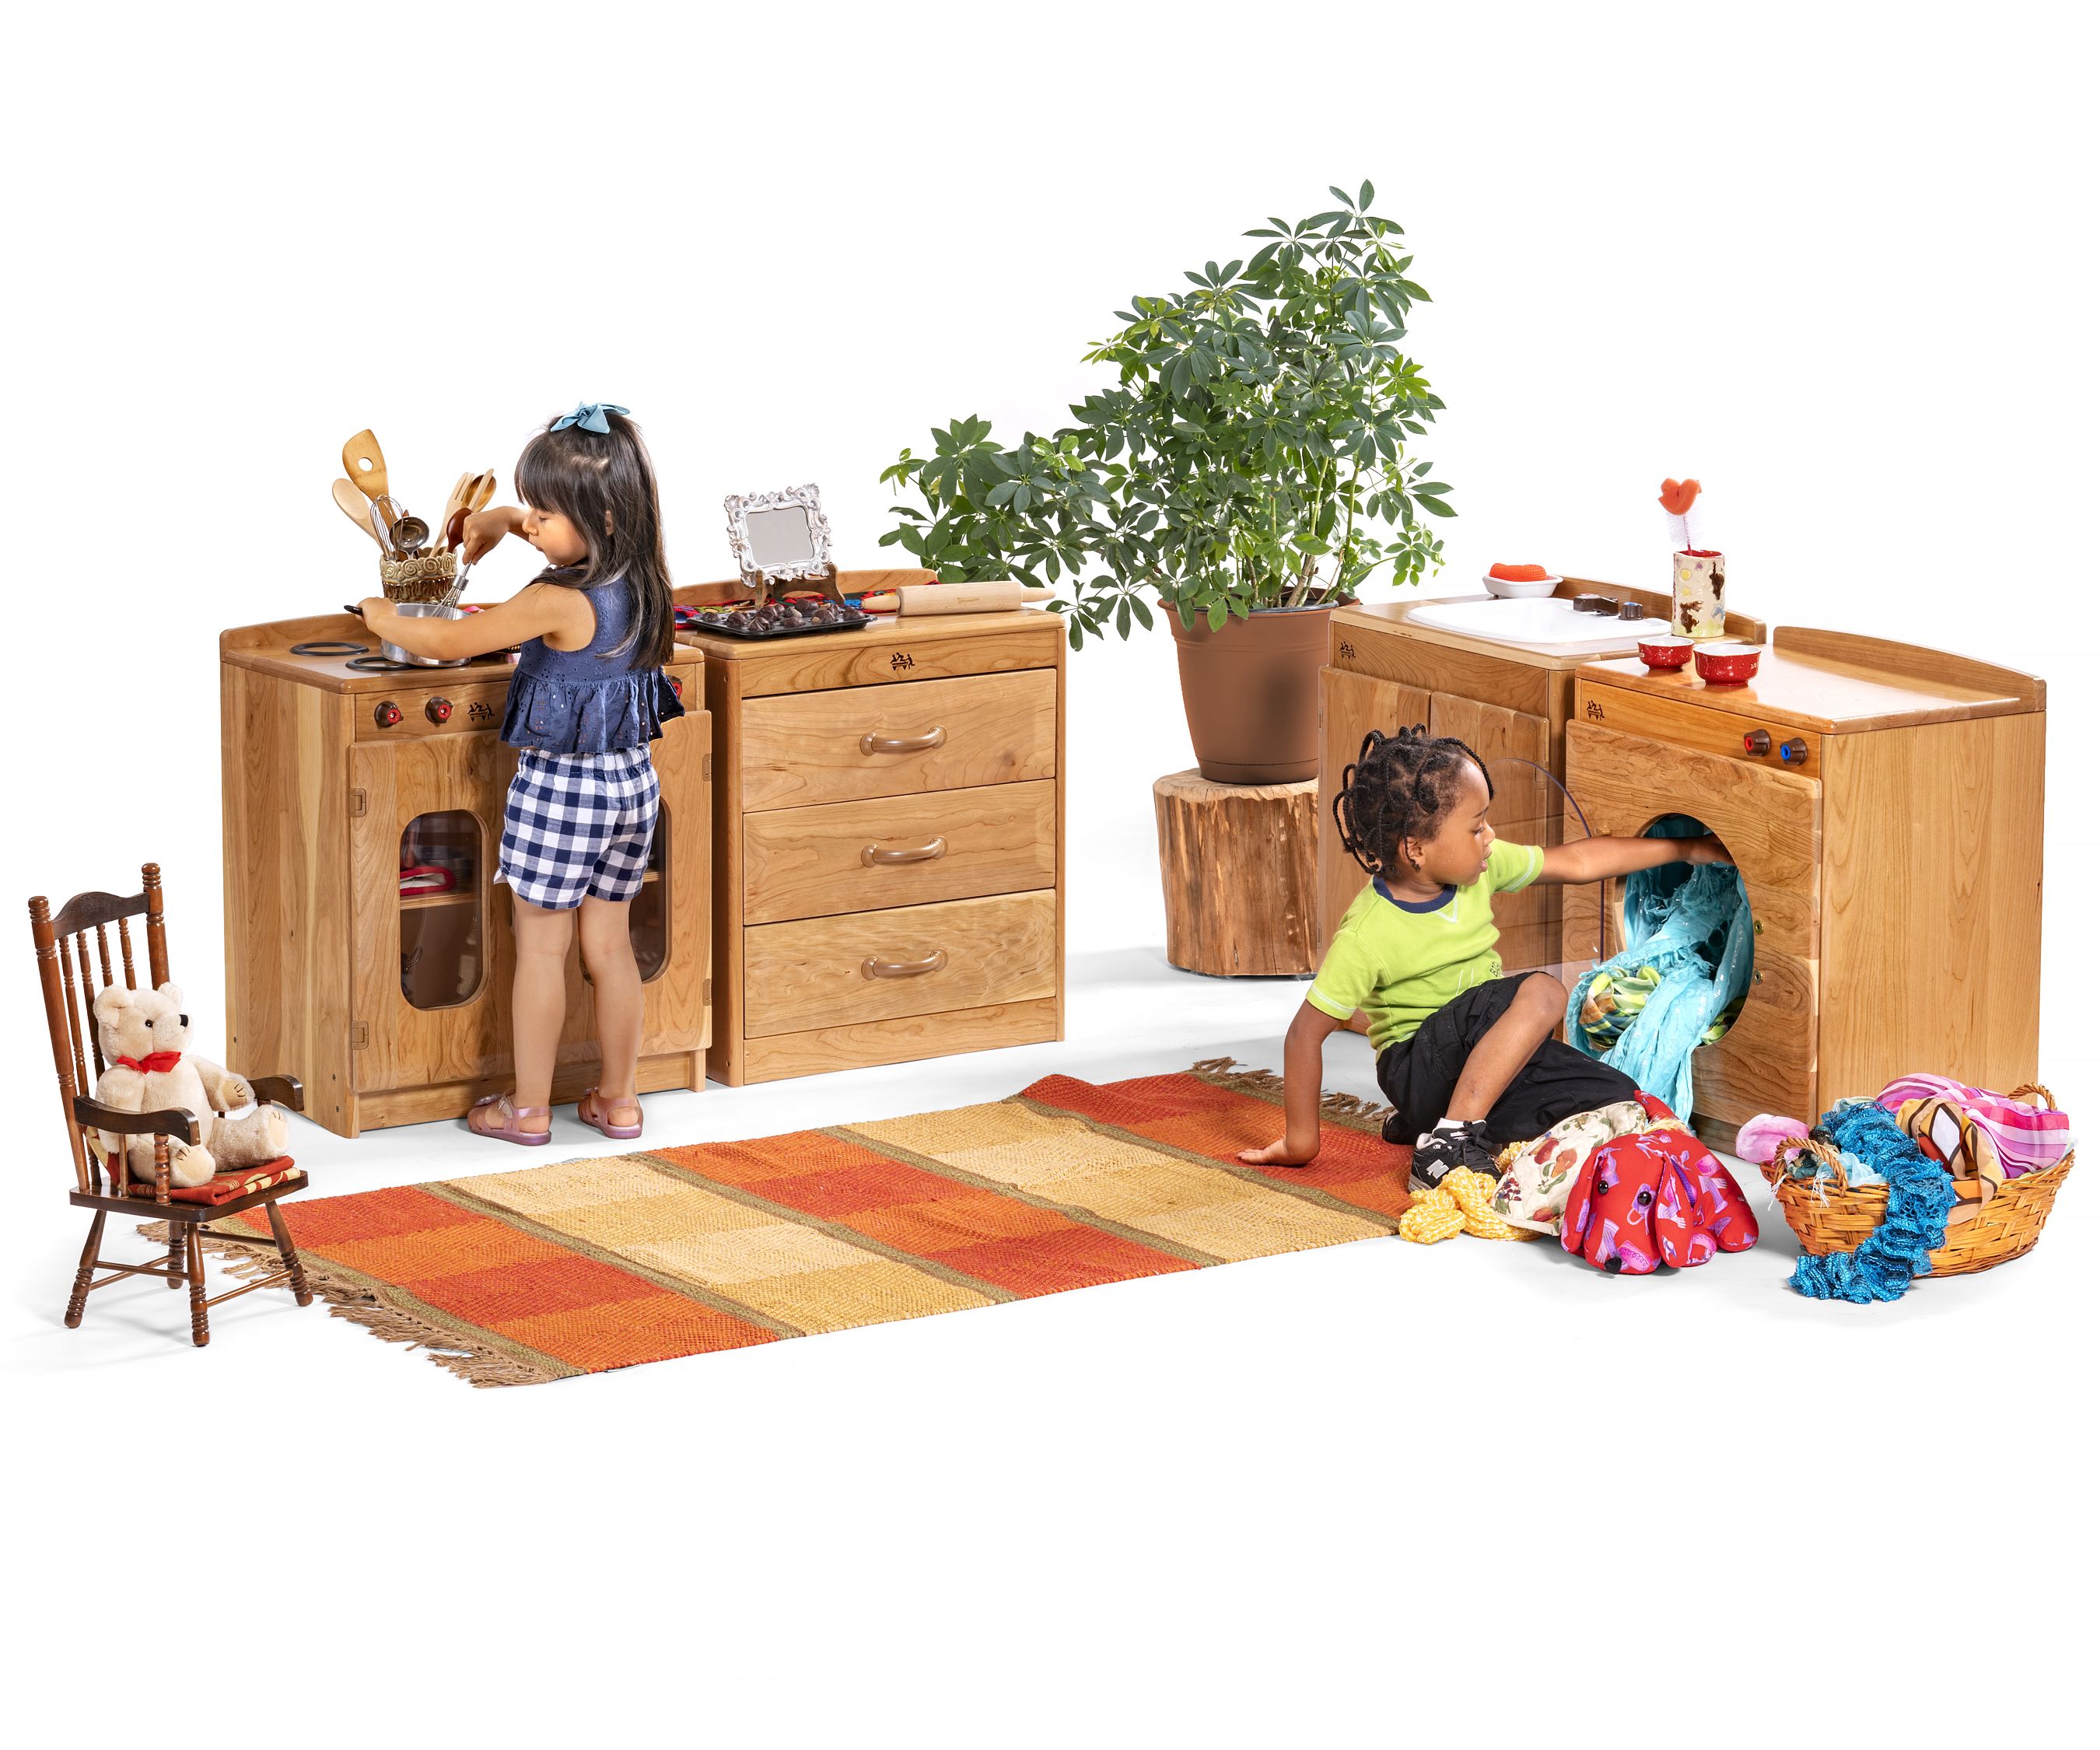 https://www.communityplaythings.com/-/media/images/product-images/play/dramatic-play/product-images/c370-woodcrest-play-house-set/c370-in-use.ashx?rev=efd6843f6efe48d9a020926d6c0f1737&hash=7BA9E529E21E44B90ADCD2616466F574